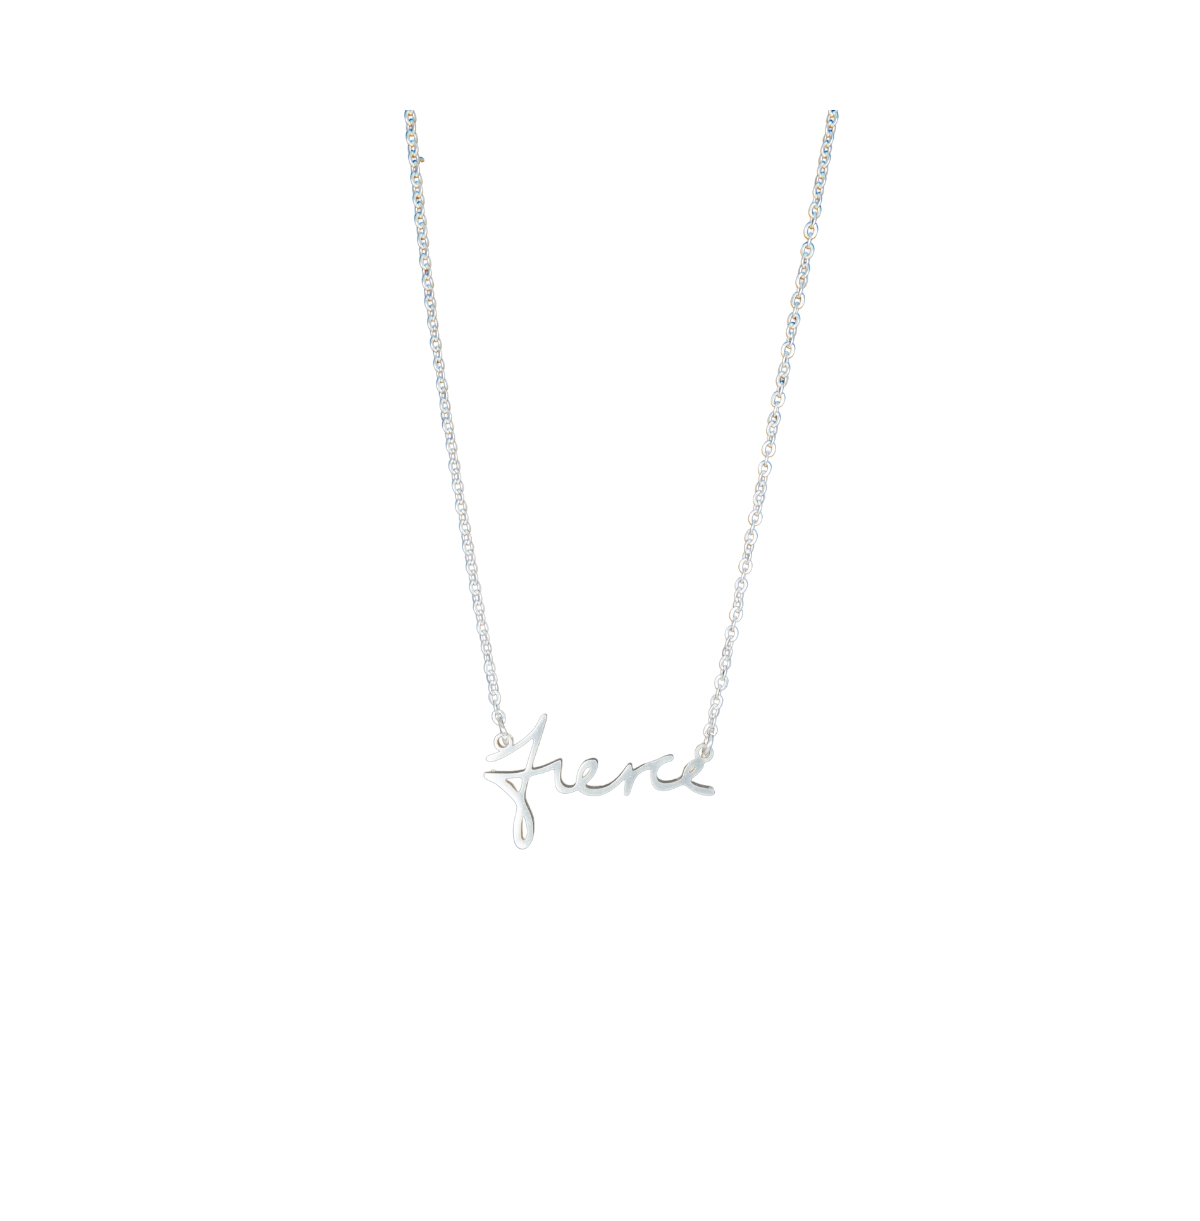 316L Absolute Affirmation "Fierce" Necklace - Silver